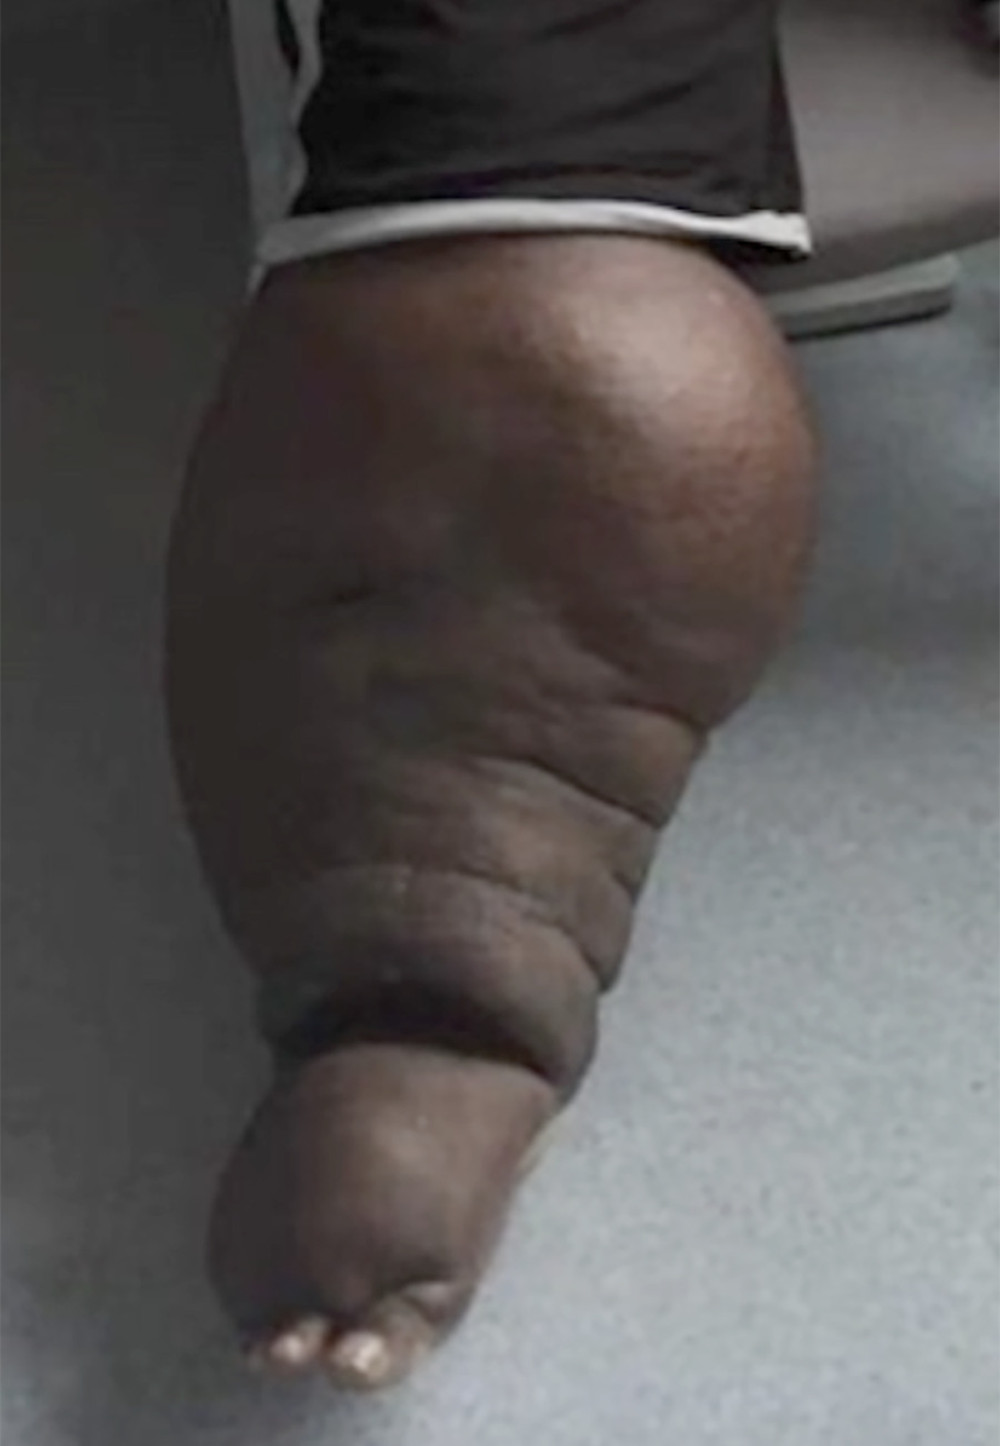 Picture of elephantiasis in the right lower limb of the patient.